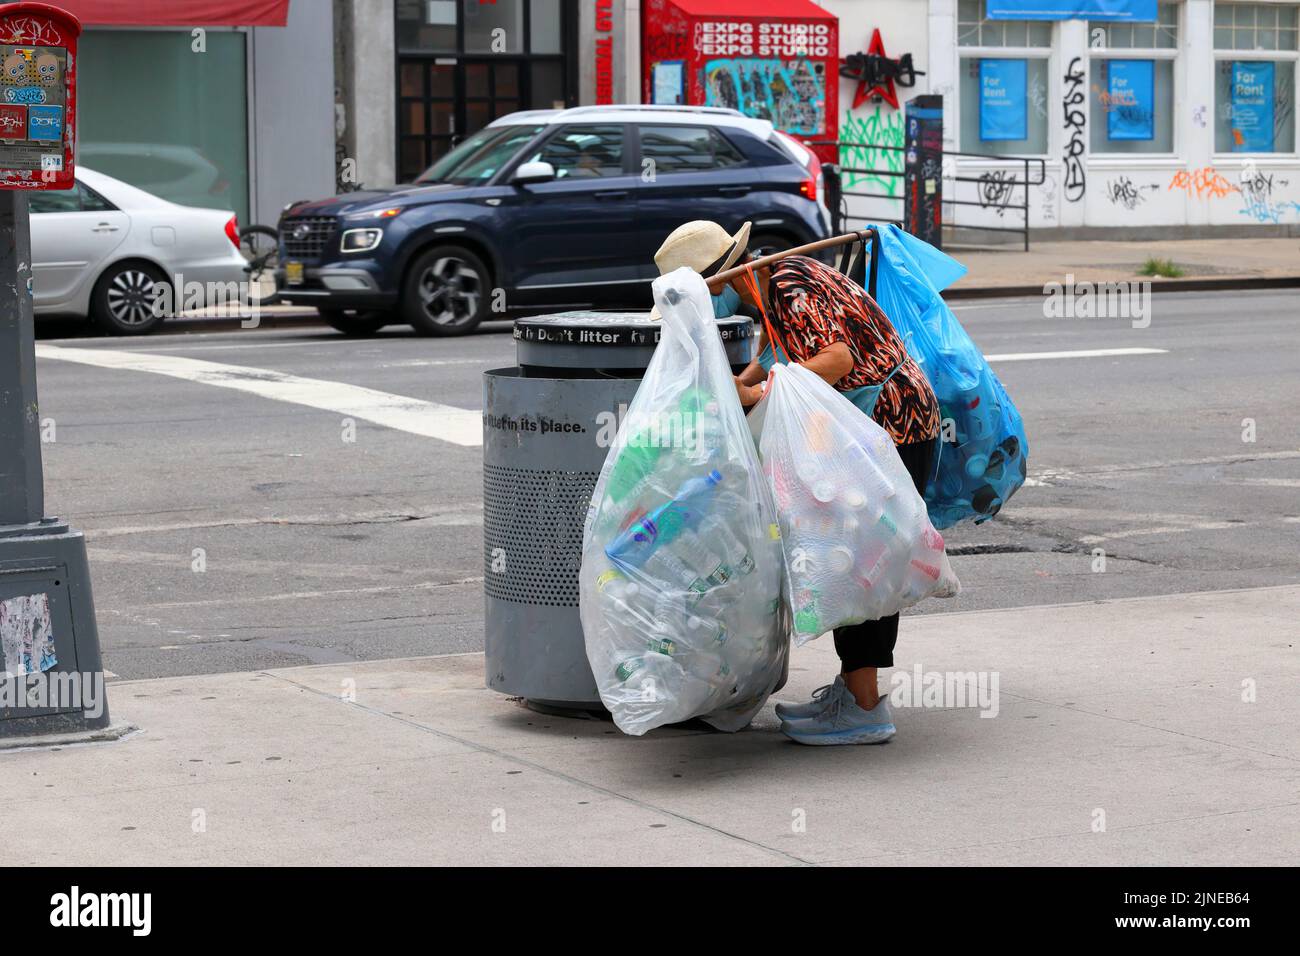 An elderly Asian person reaches into a New York City trash bin for recyclables. Many people, especially elderly Asians, are dependent on the ... Stock Photo